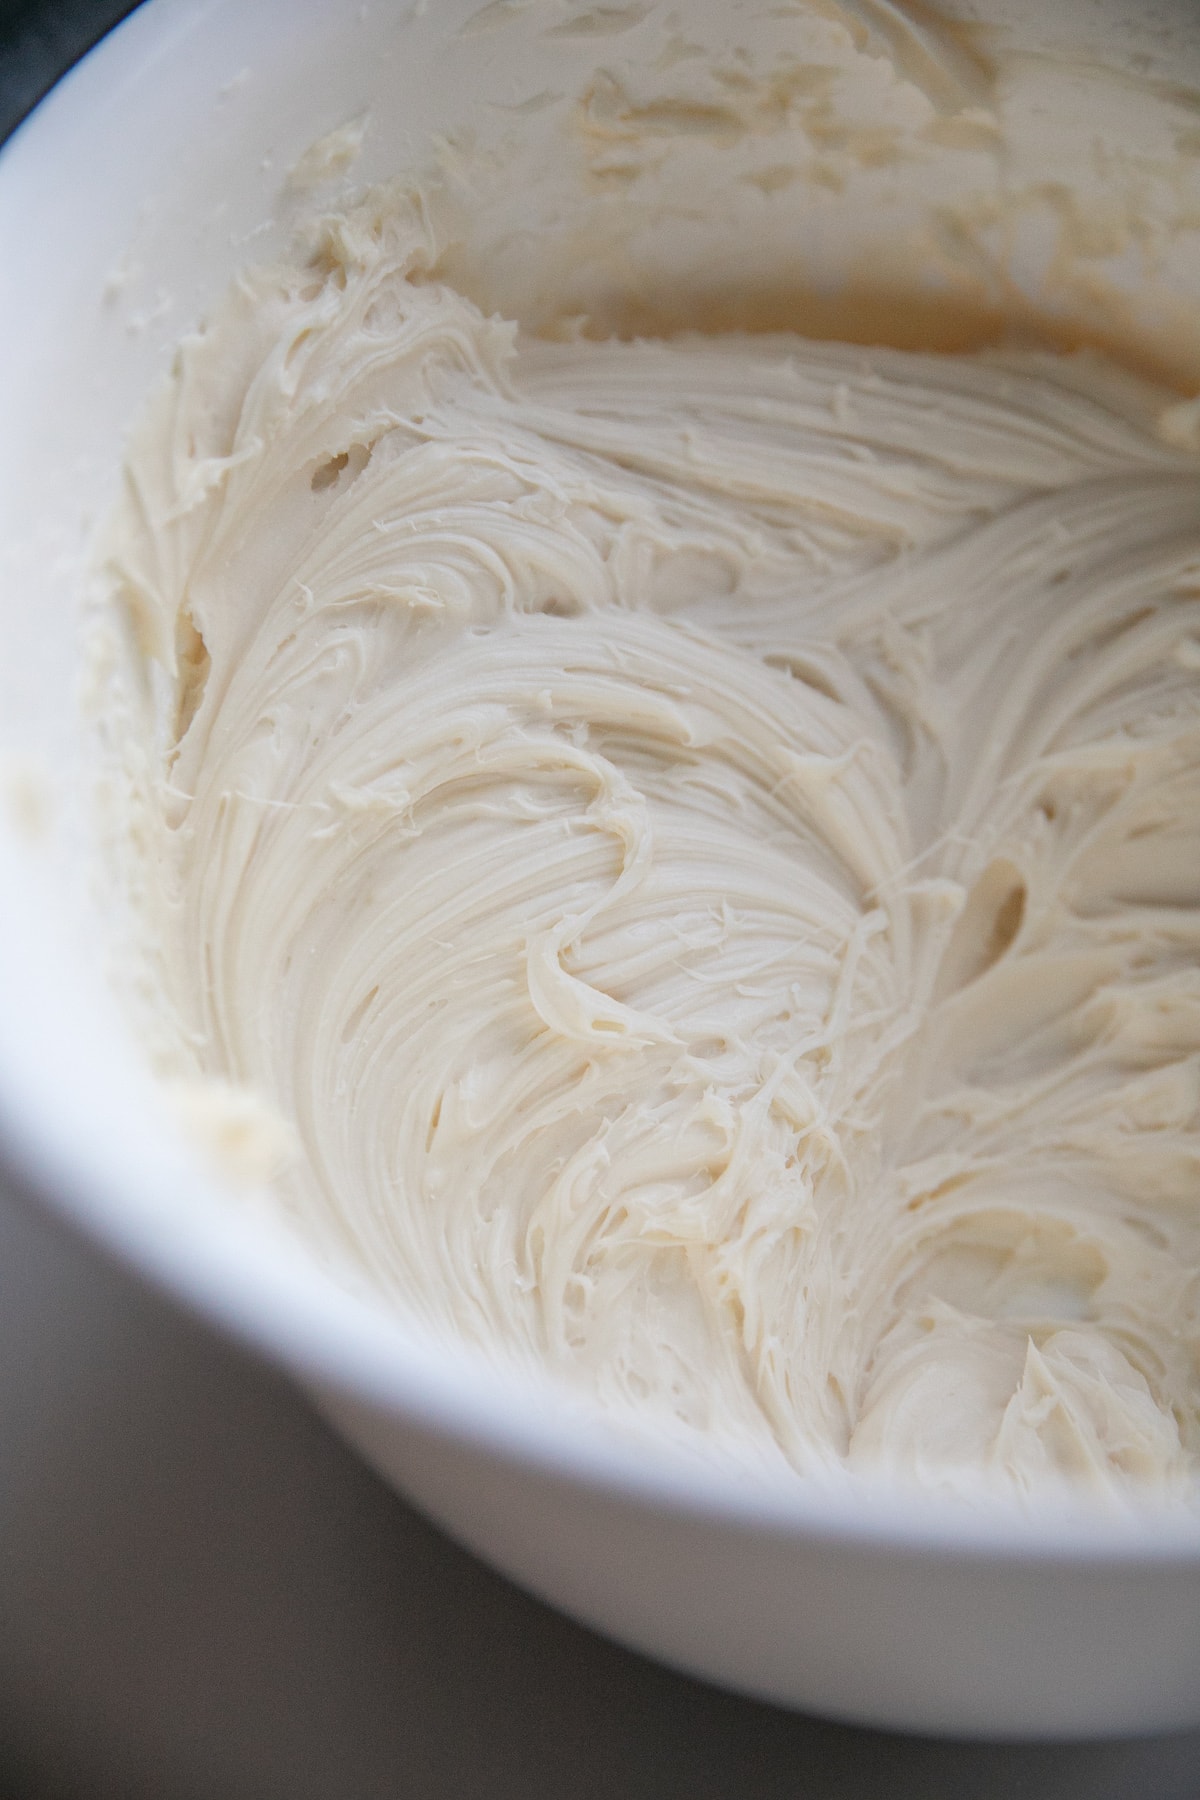 cream cheese frosting in bowl